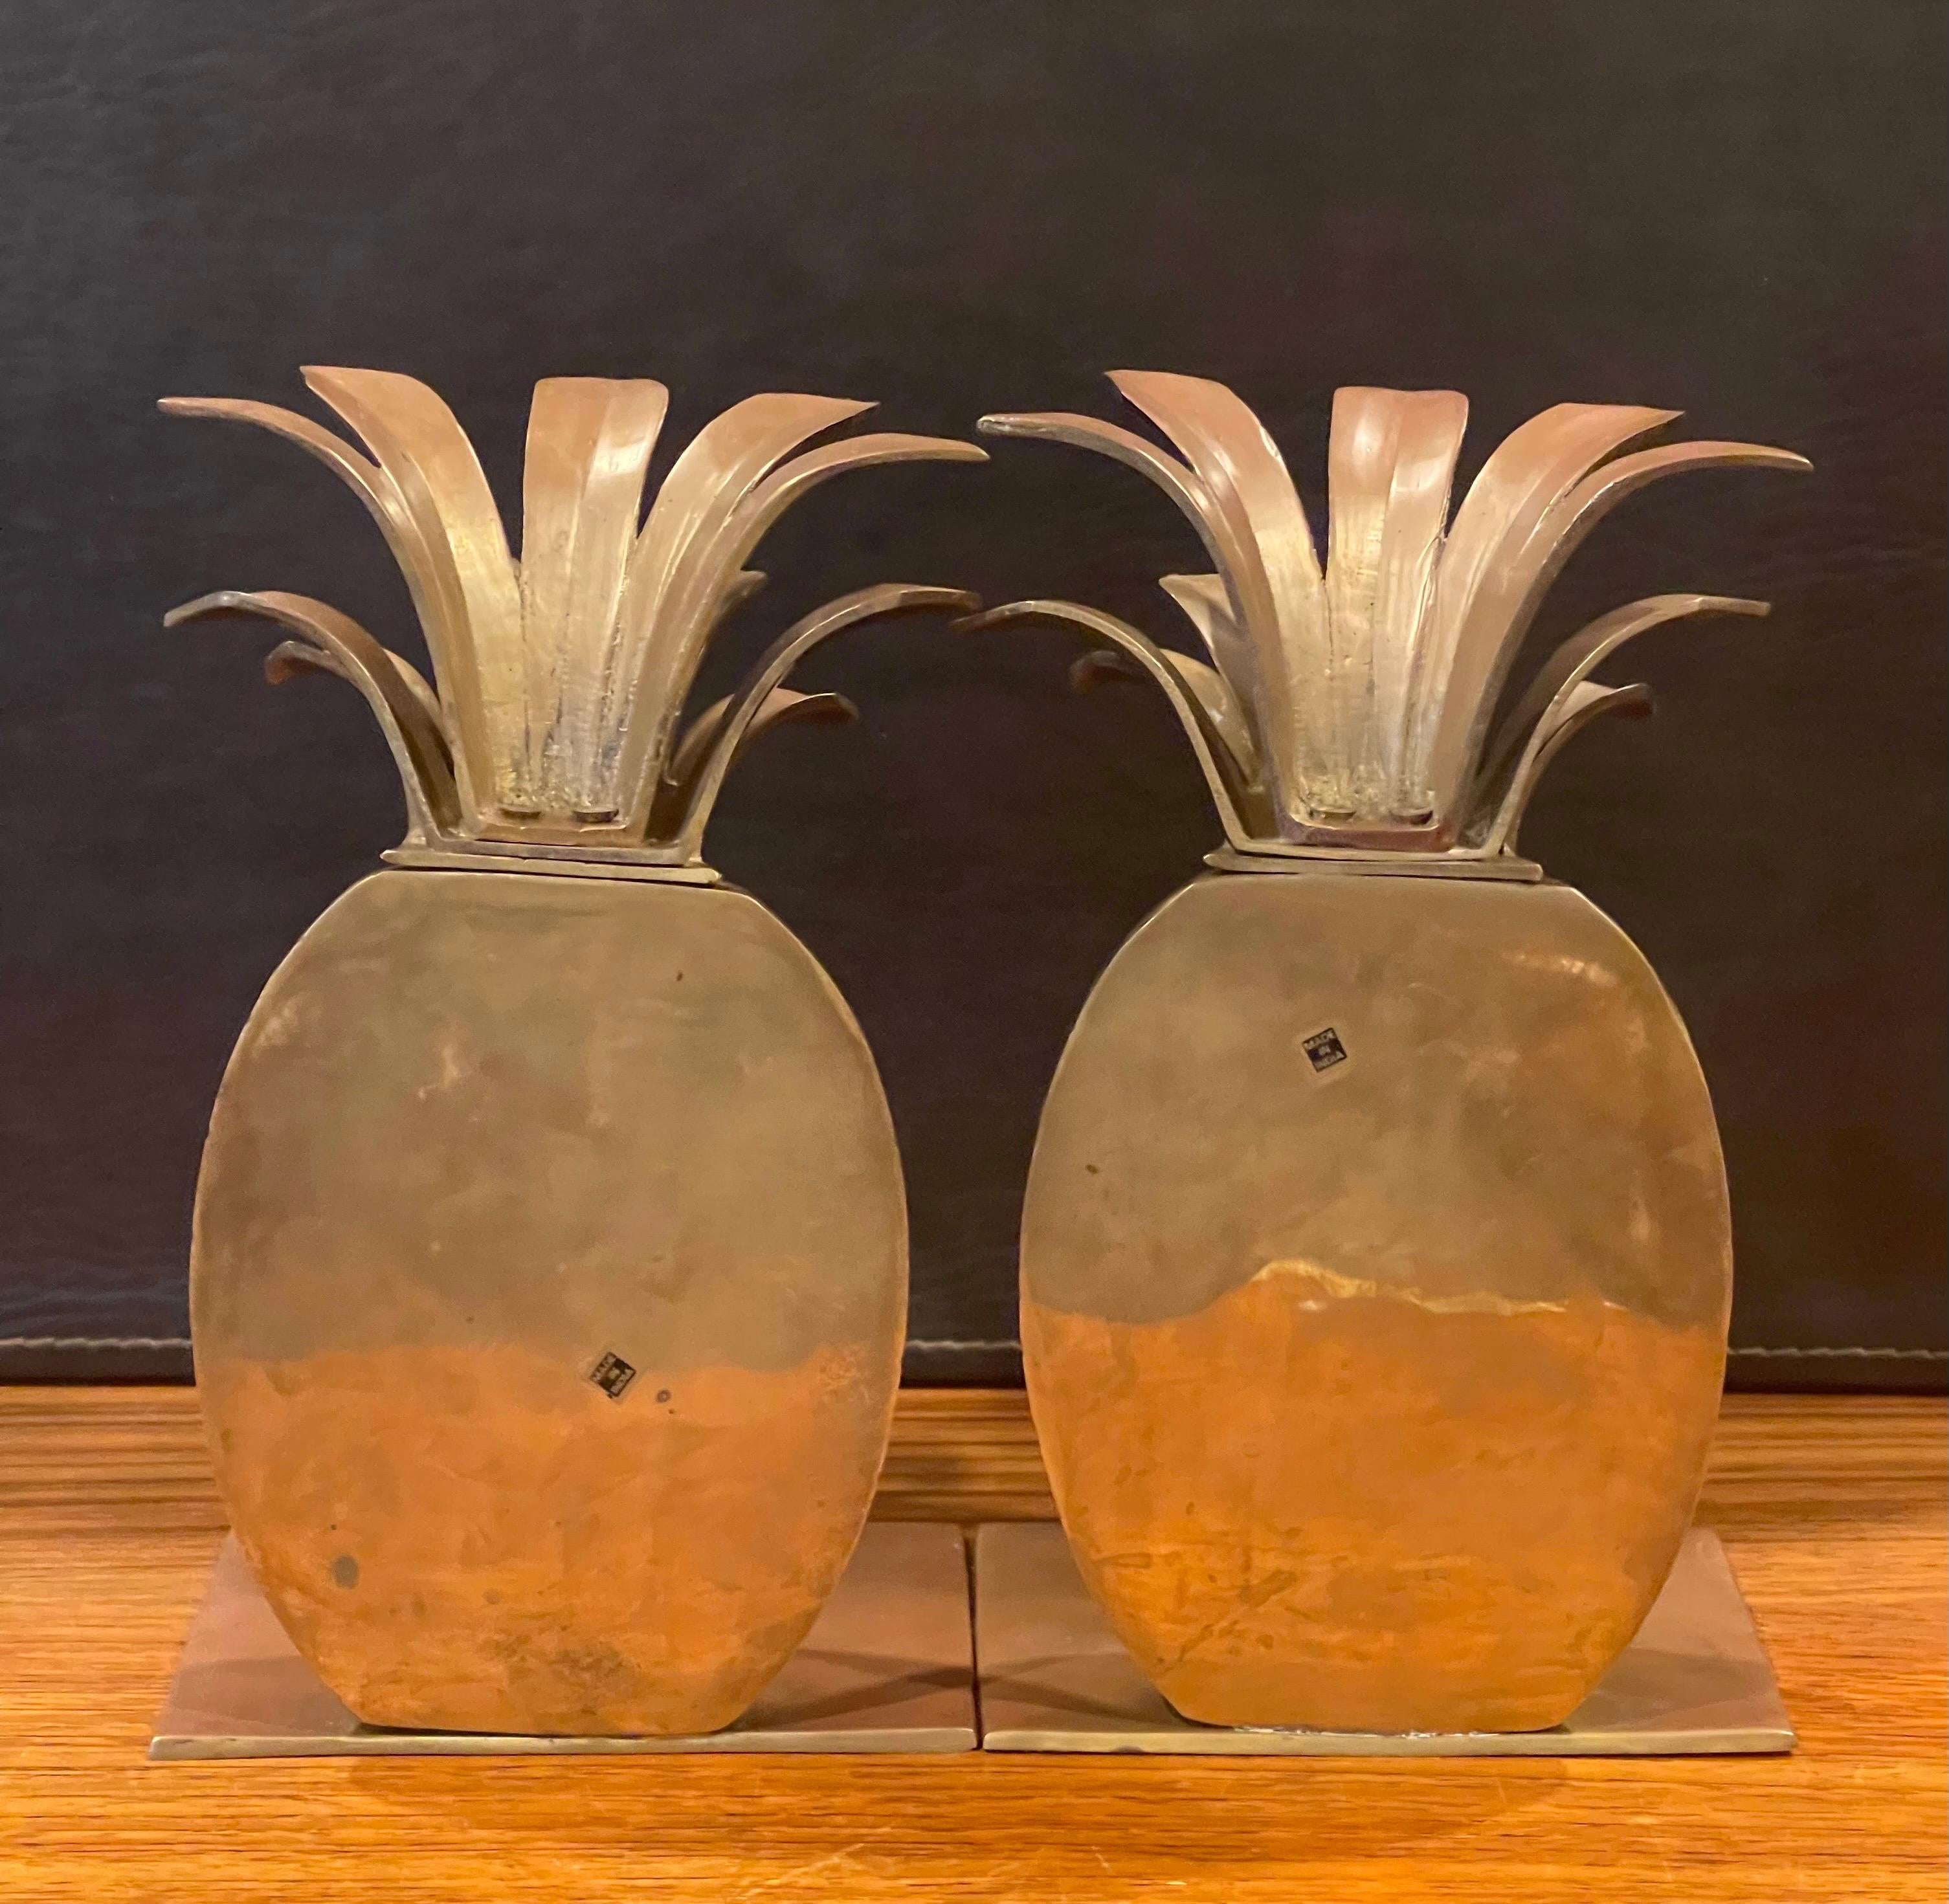 20th Century Pair of Hollywood Regency Brass Pineapple Bookends